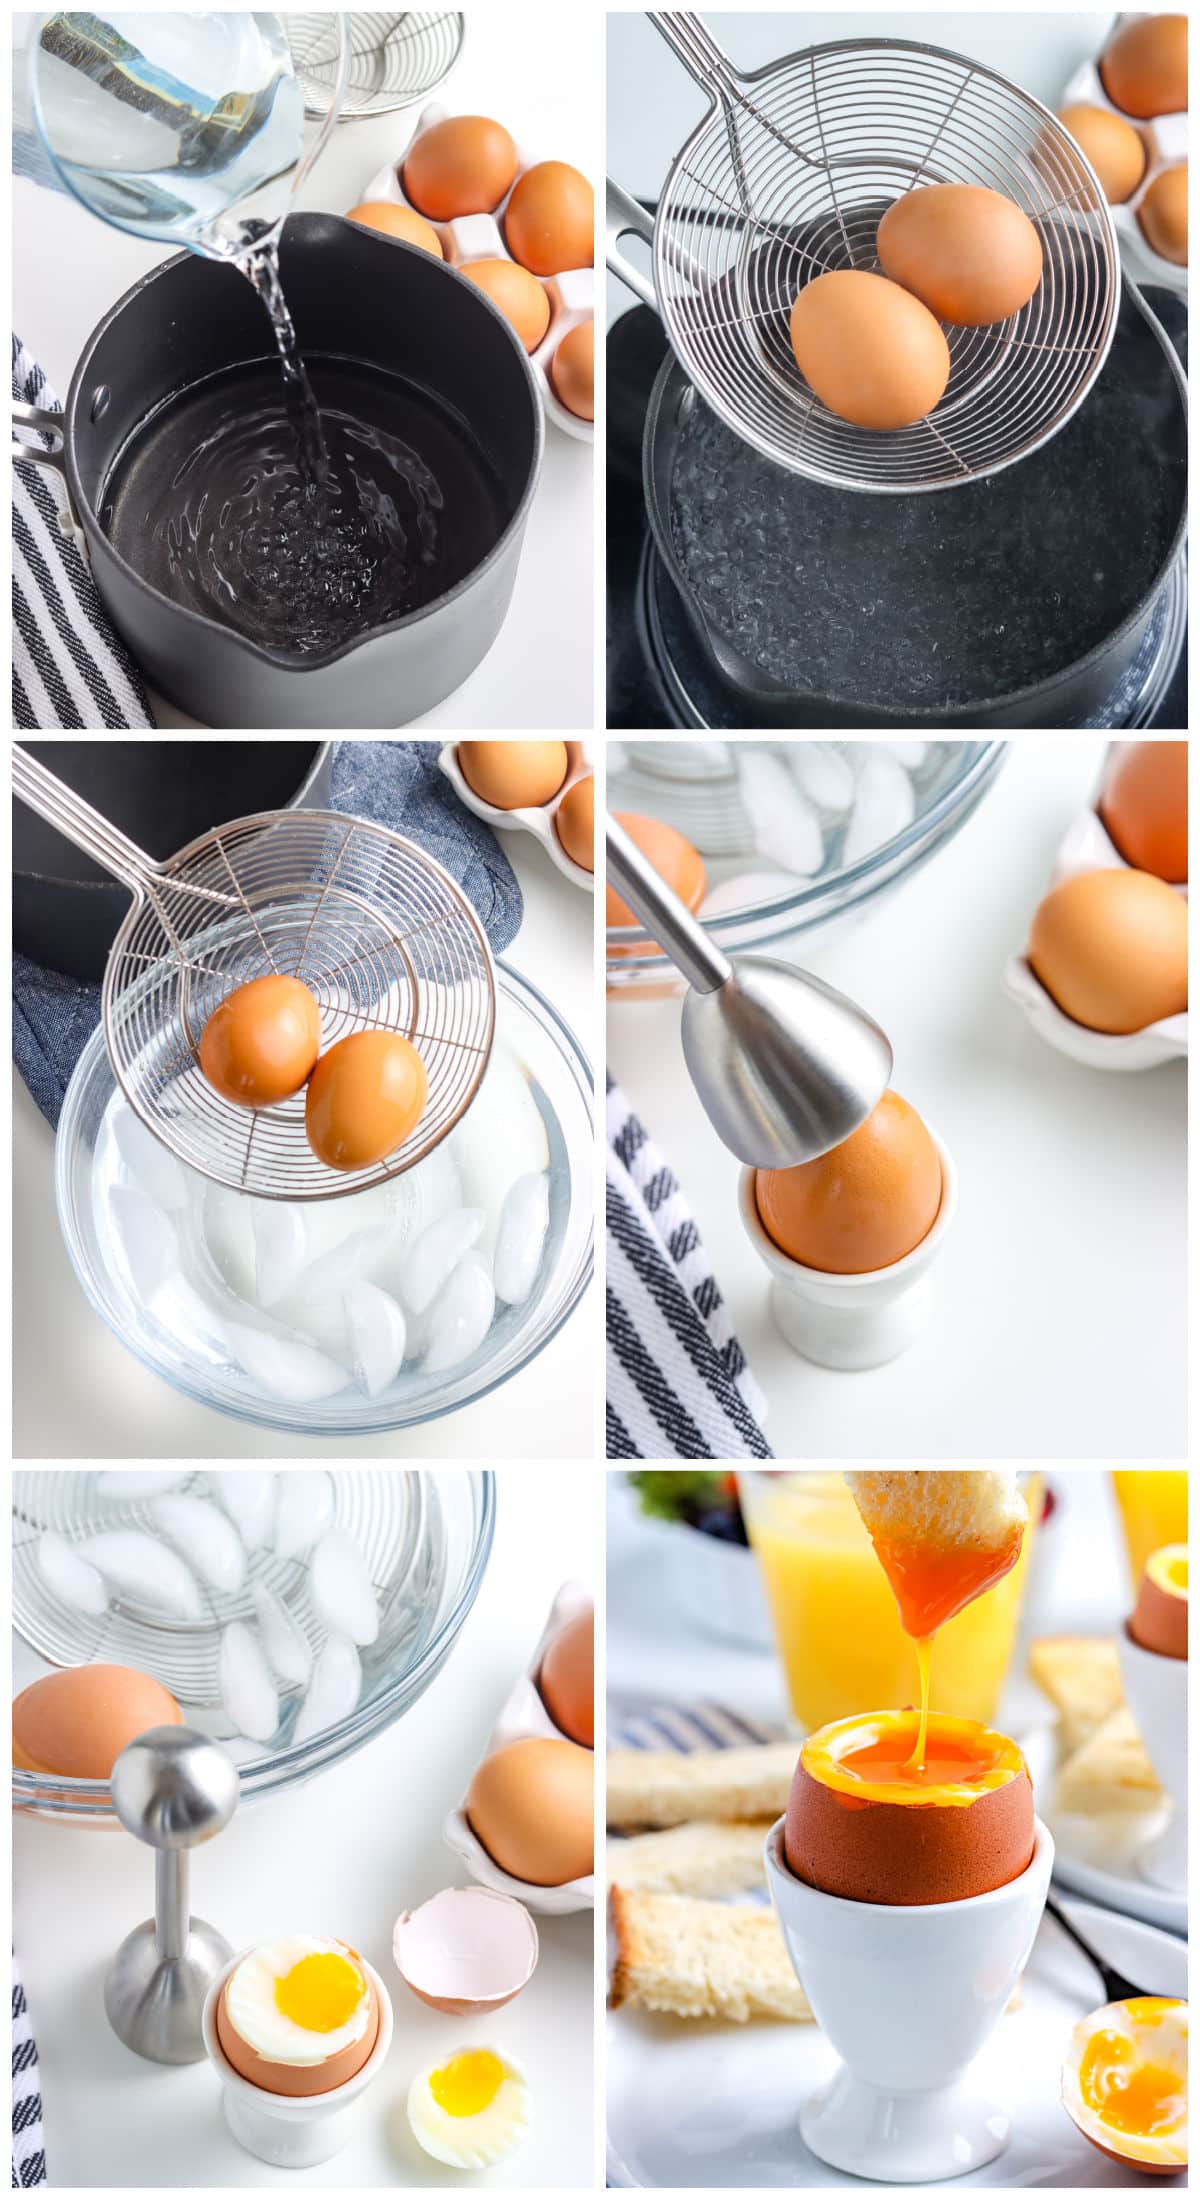 A picture collage showing How To Make Soft Boiled Eggs.